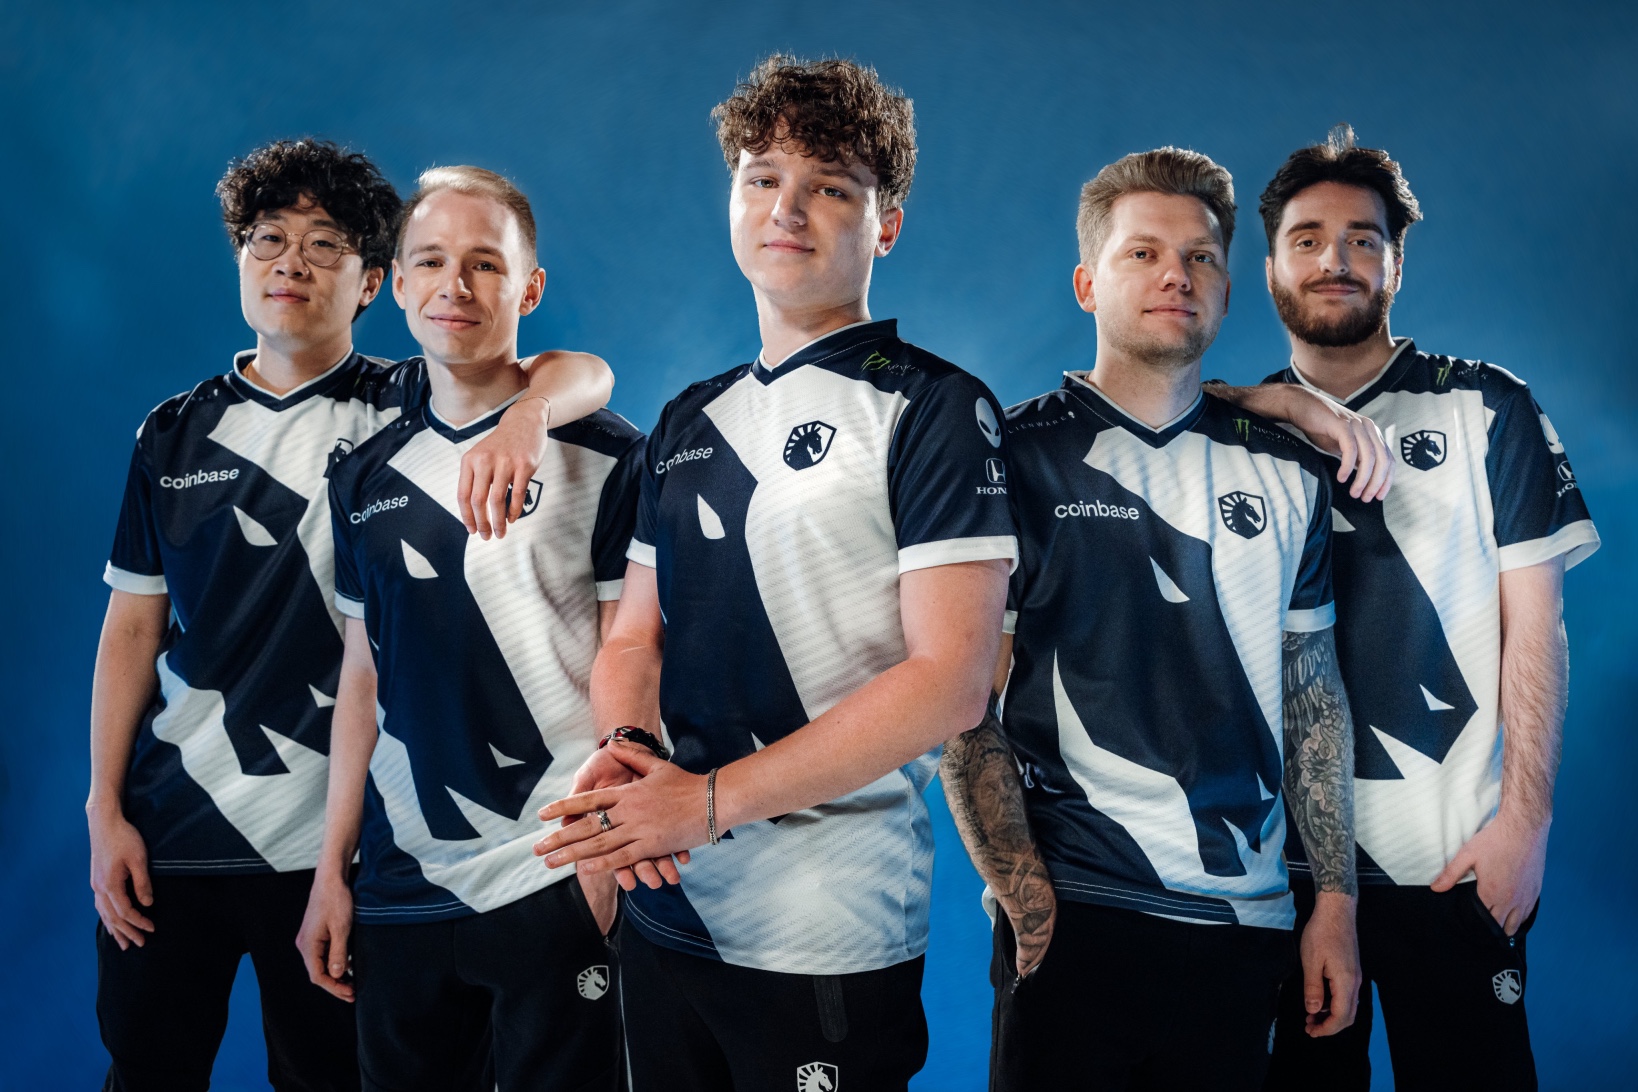 Liquid declared the need for training in Europe